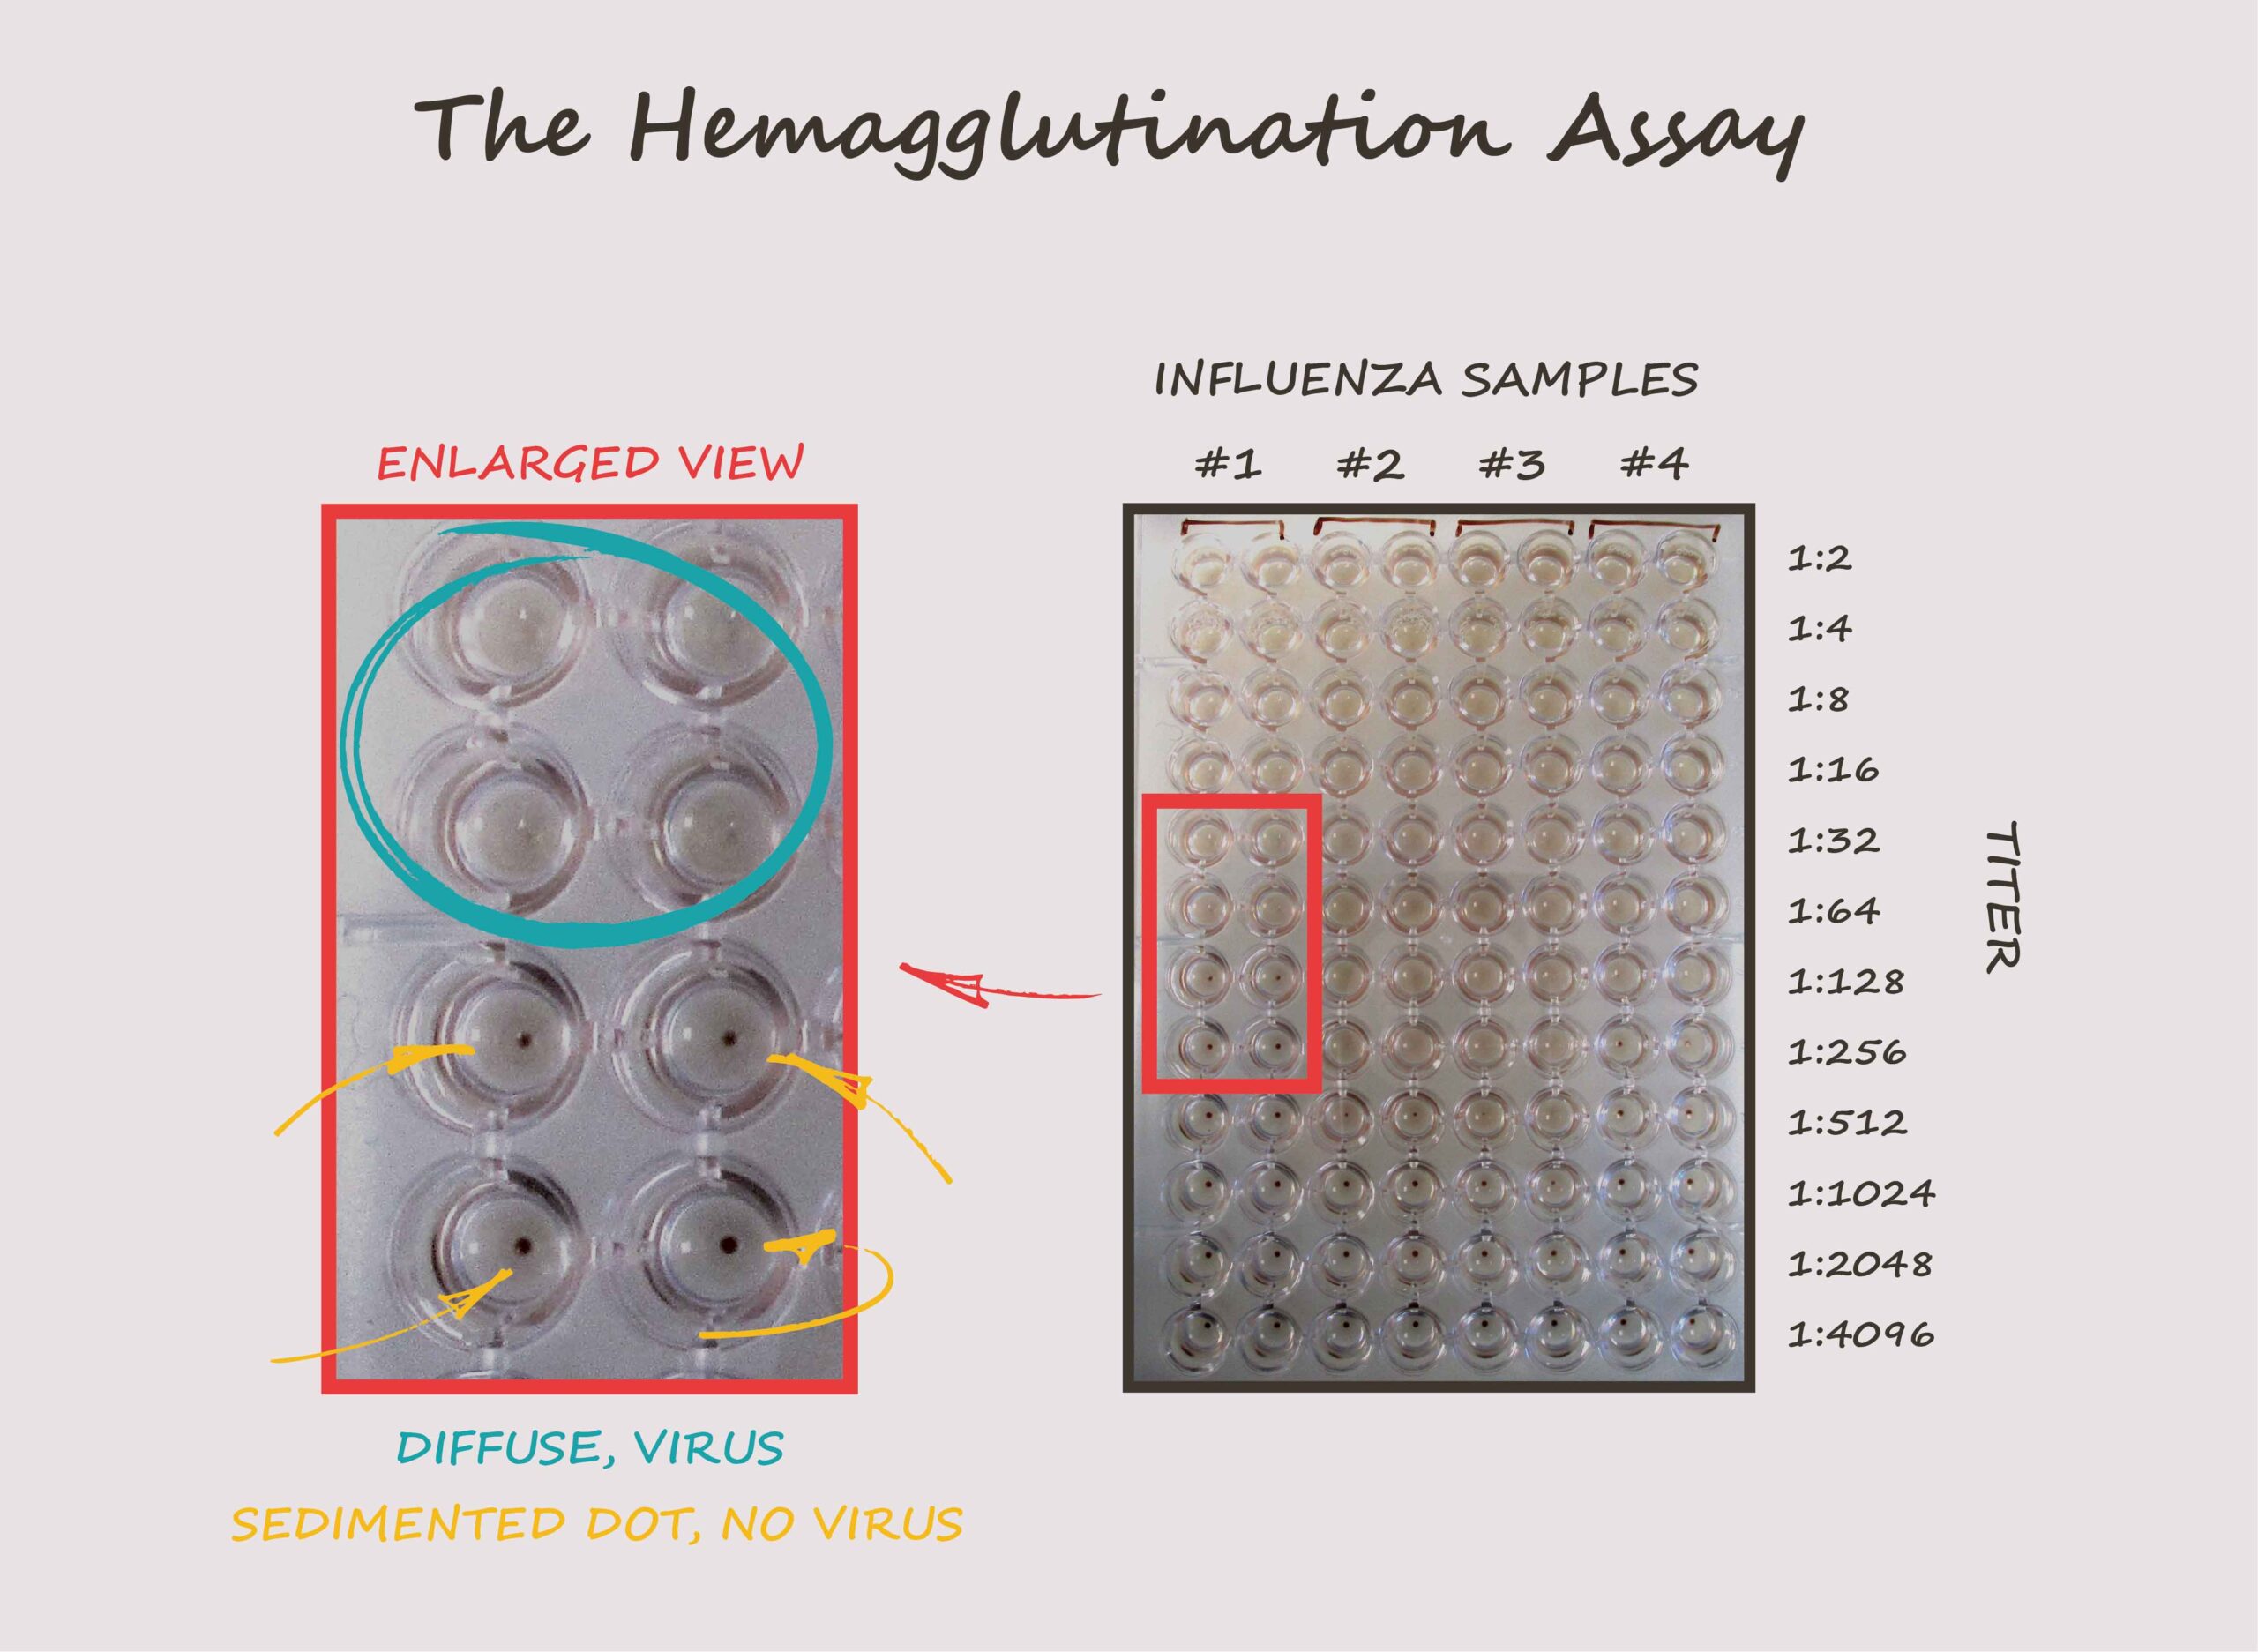 Infographic showing how the HA assay works